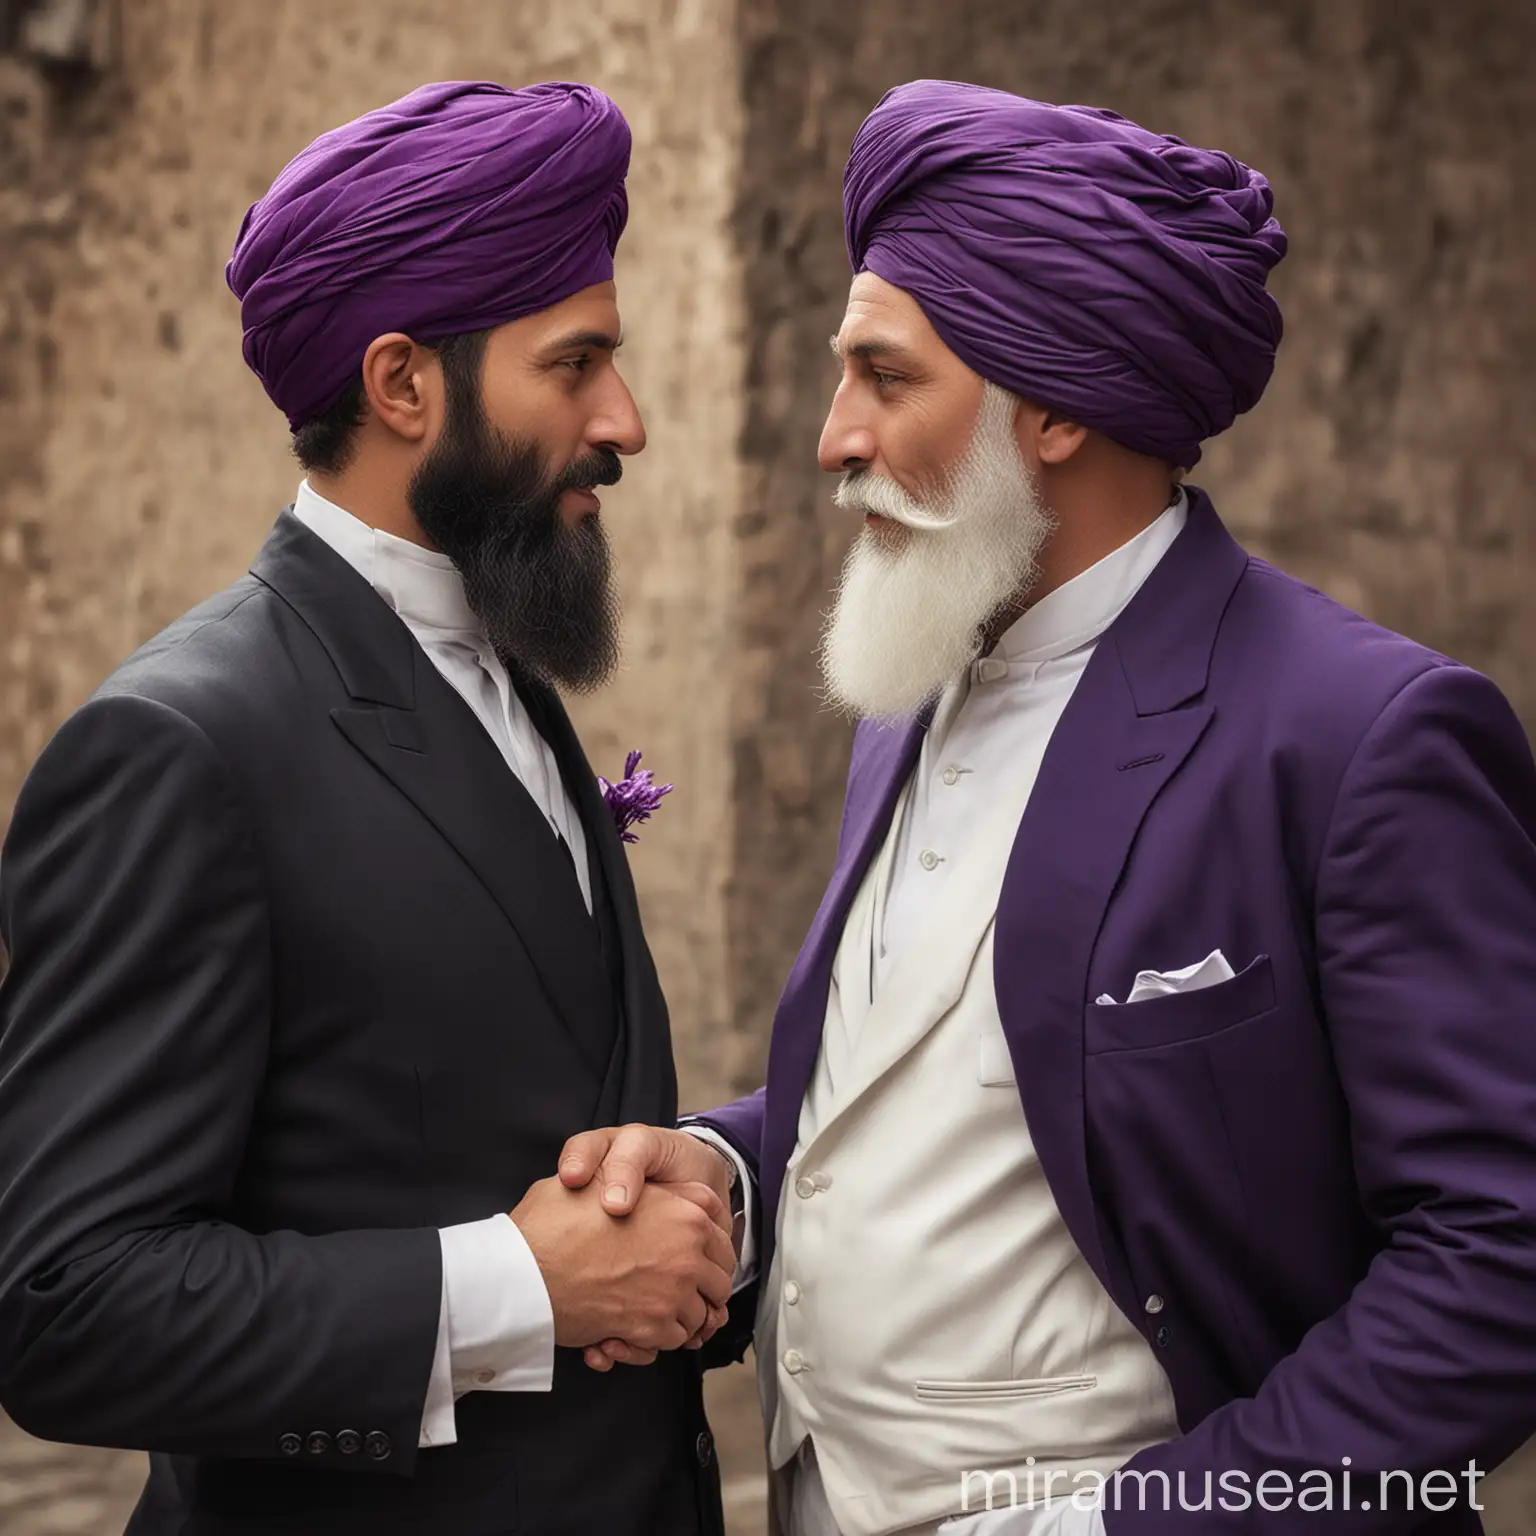 Western Businessman in Elegant Suit Shaking Hands with Genius in White Suit and Turban